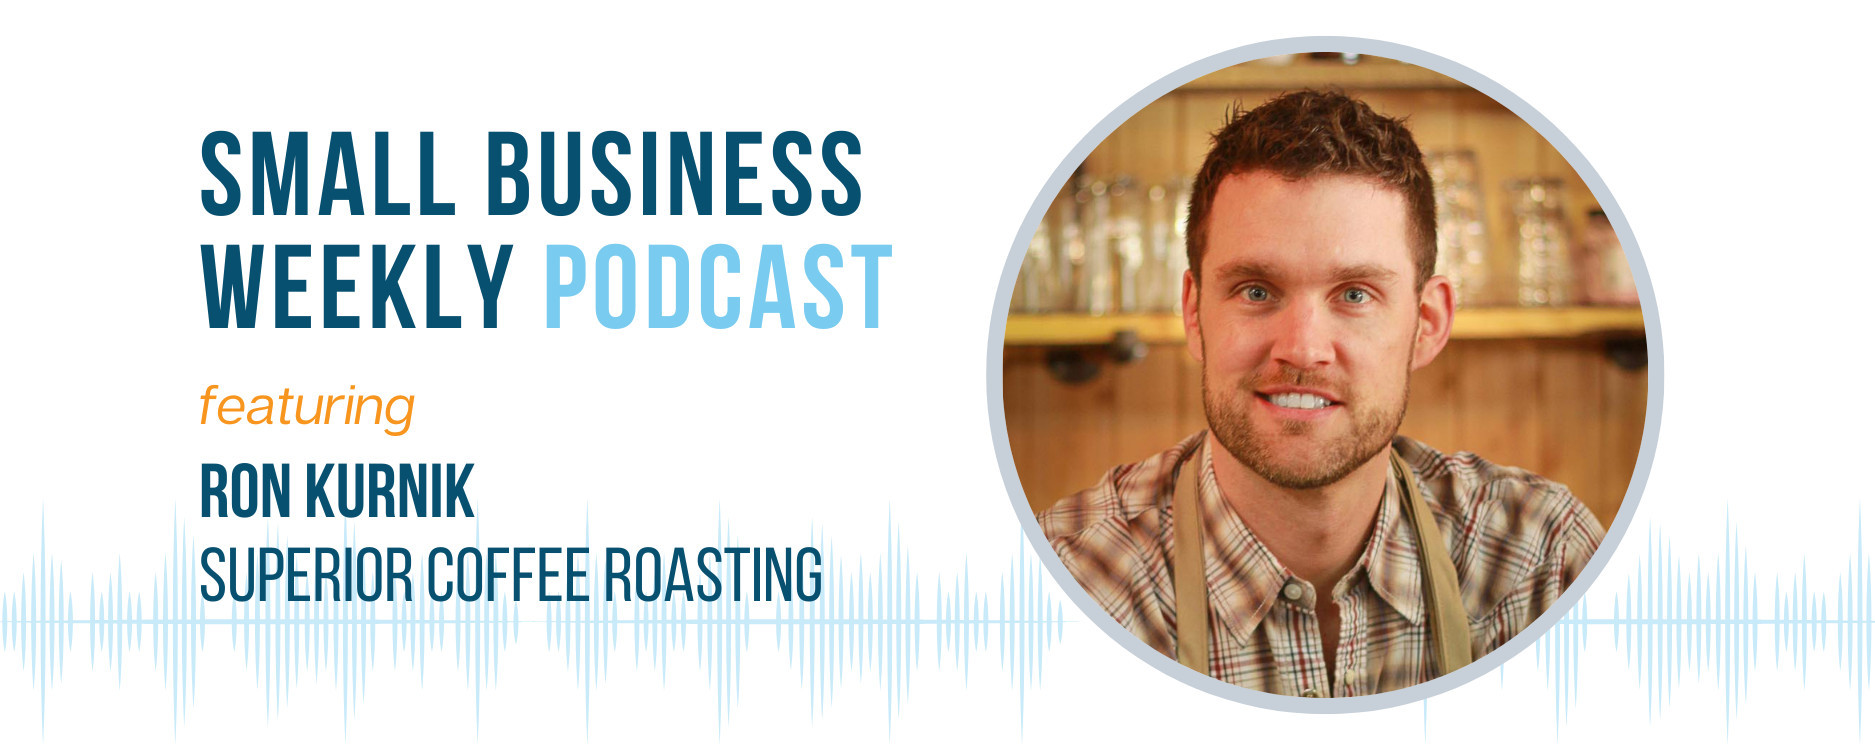 Podcast: Leveraging Great Lakes Assets to Make Great Coffee - SBAM